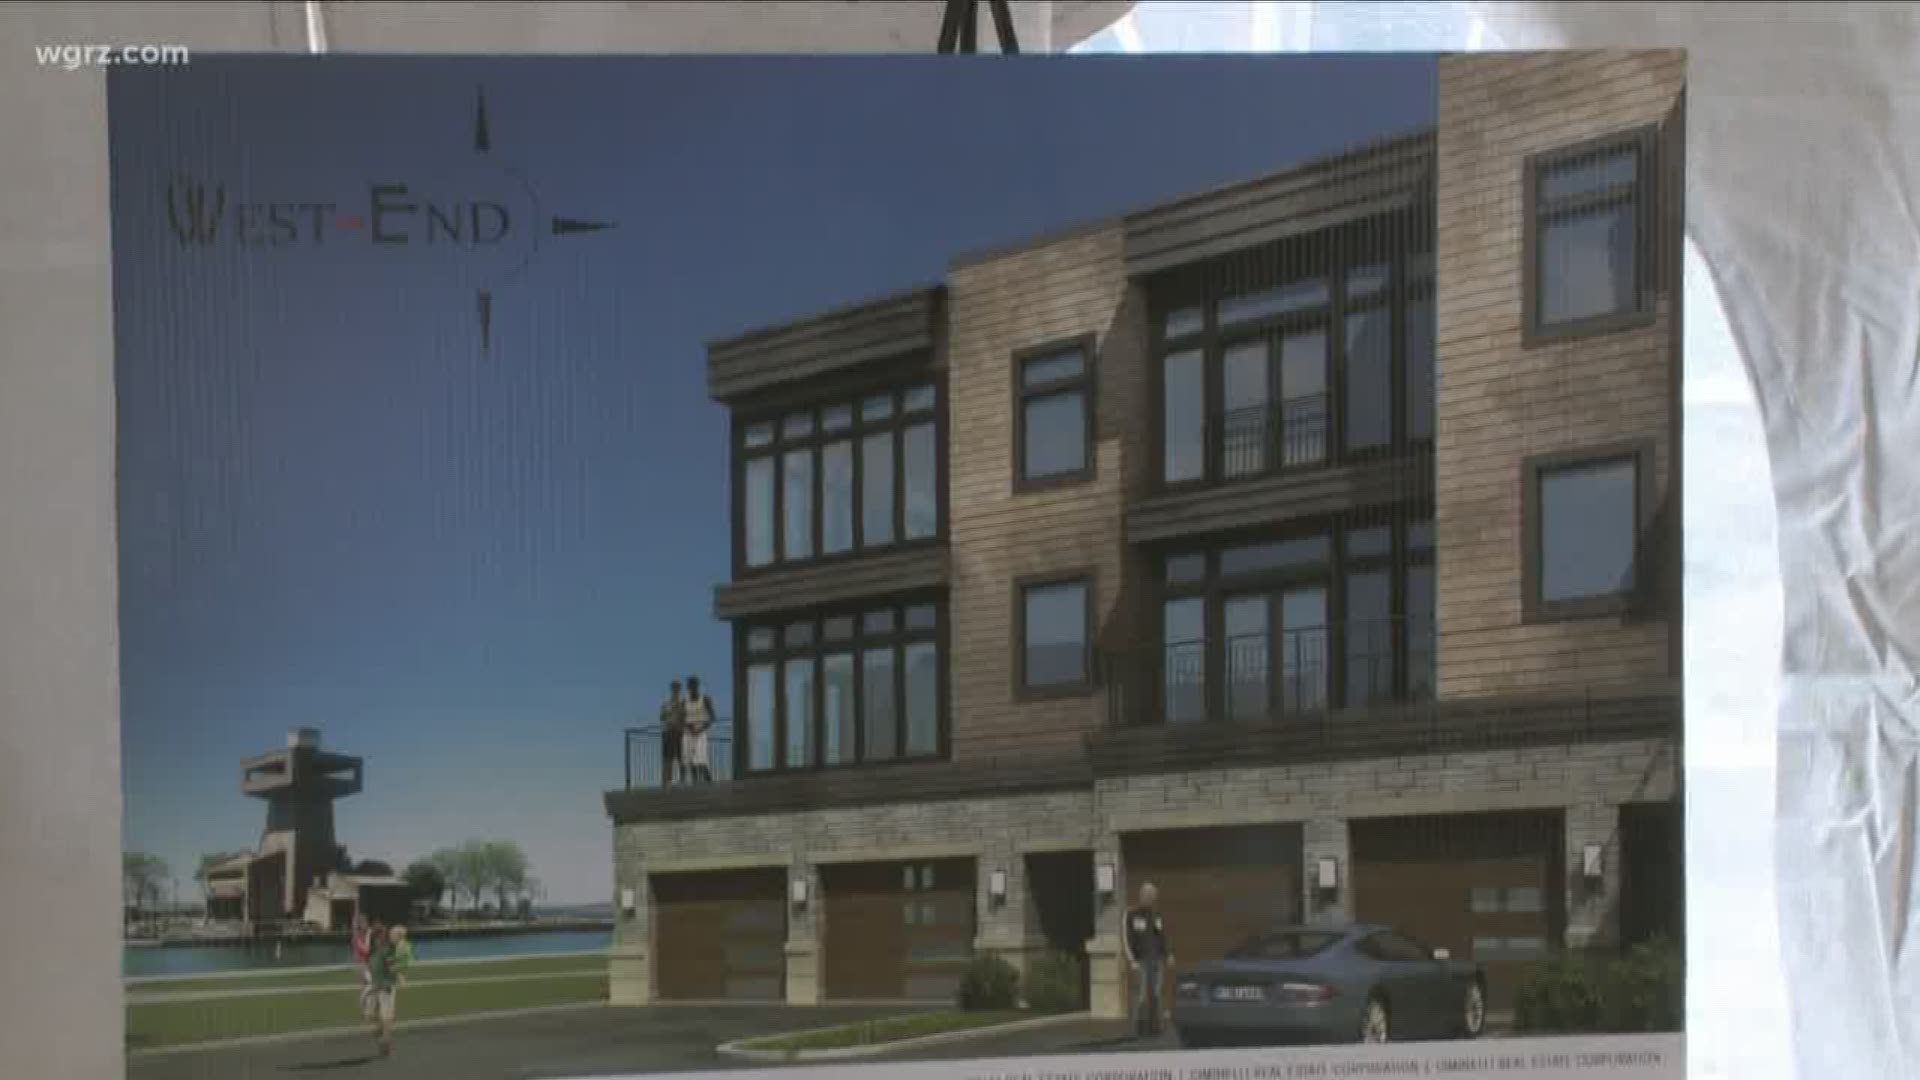 TOWNHOME PROJECT STARTS BY WATERFRONT